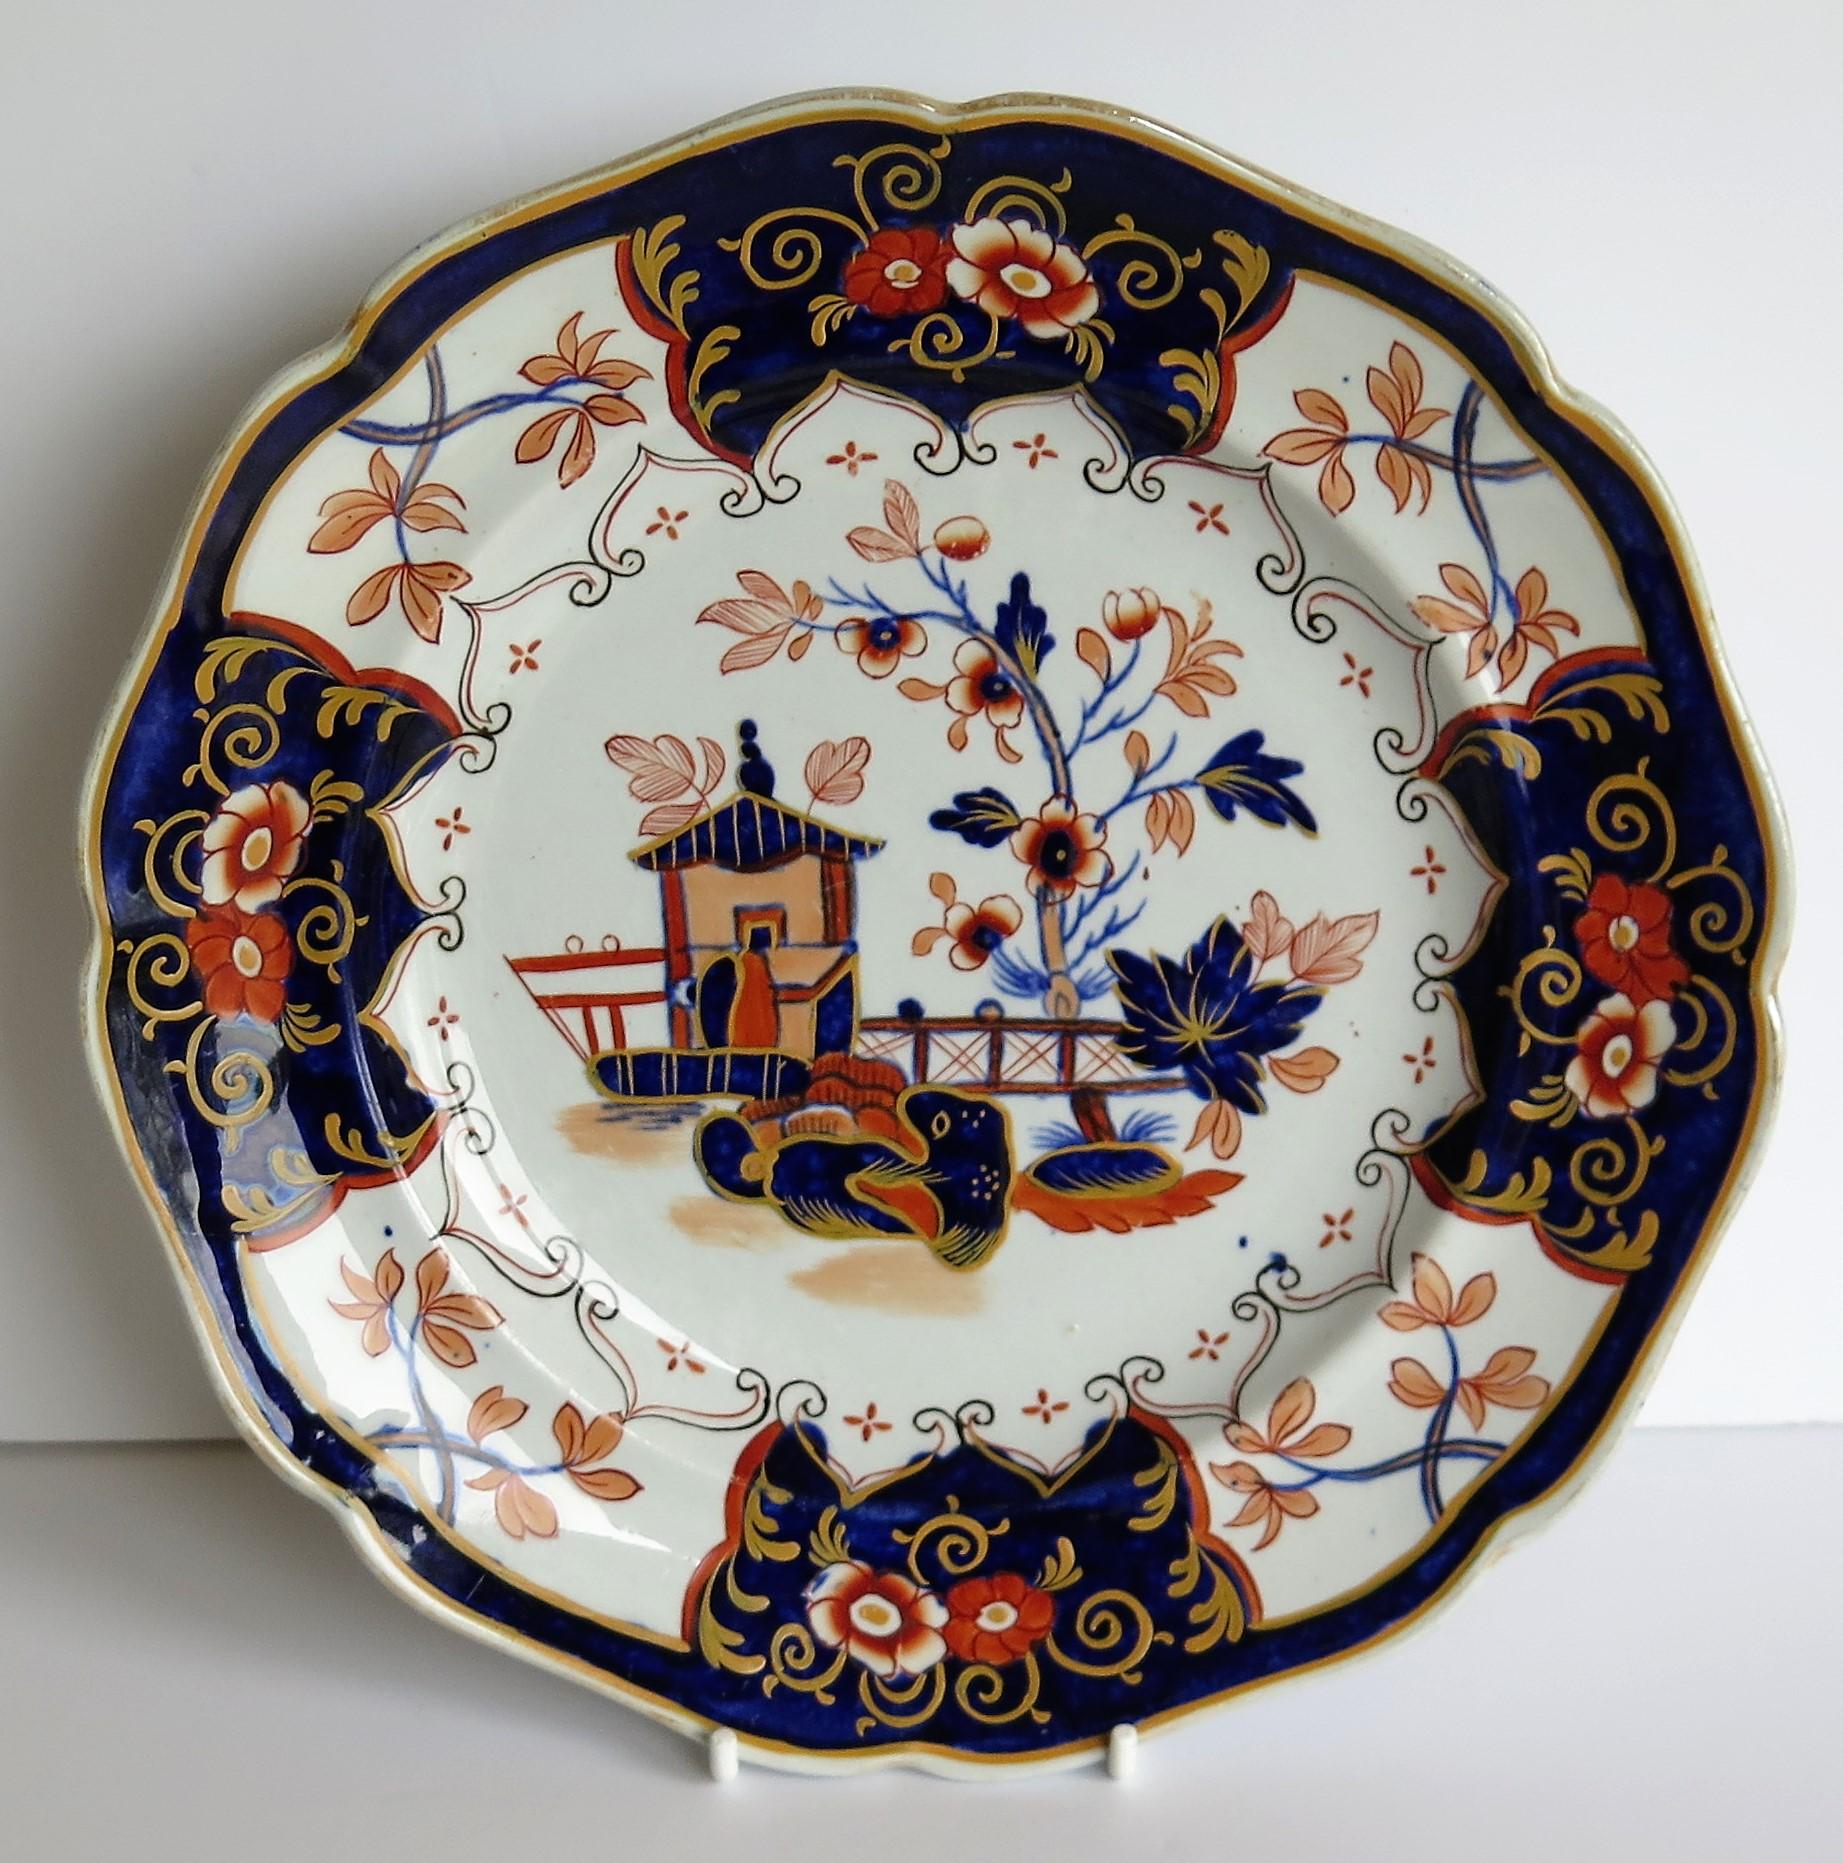 This is a highly decorative, Imperial Stone China (ironstone), plate by John Ridgway, dating to the William IVth or early Victorian period of the 19th century, circa 1840.

The plate has been carefully hand painted in bold colorful enamels with a